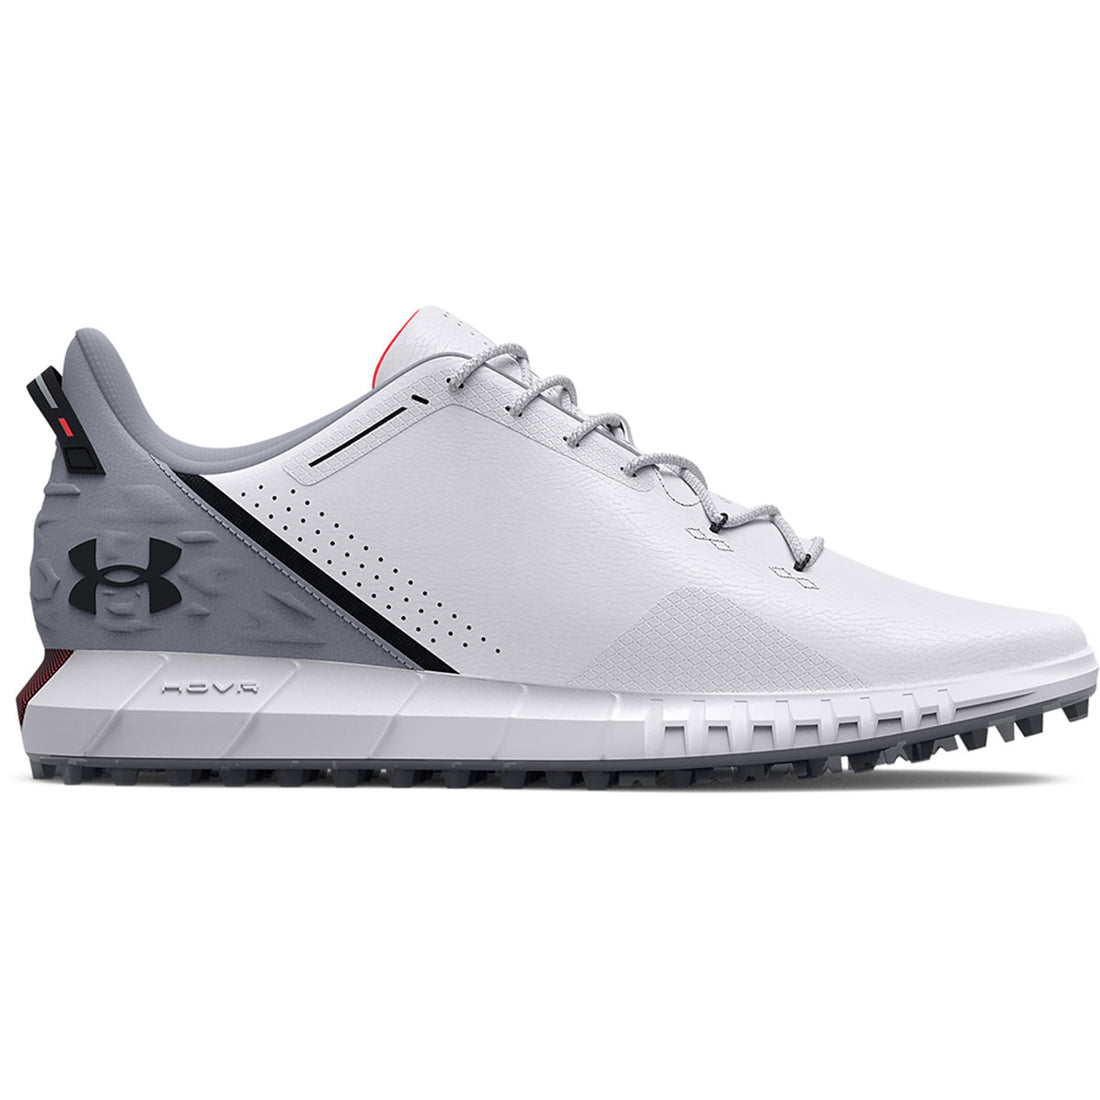 HOVR Drive SL Spikeless (White/Grey)